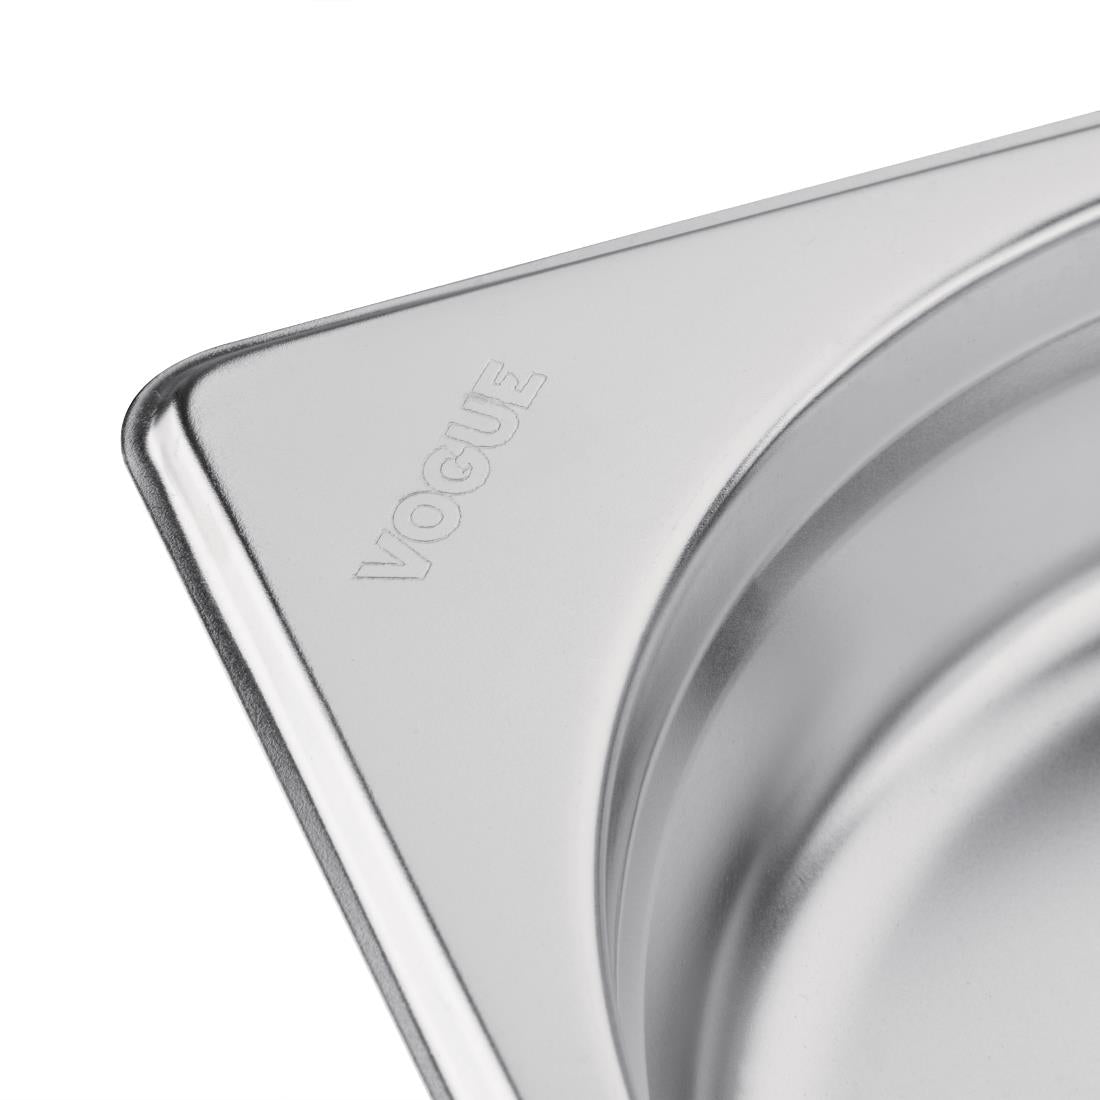 Vogue Stainless Steel 1/1 Gastronorm Pan 200mm